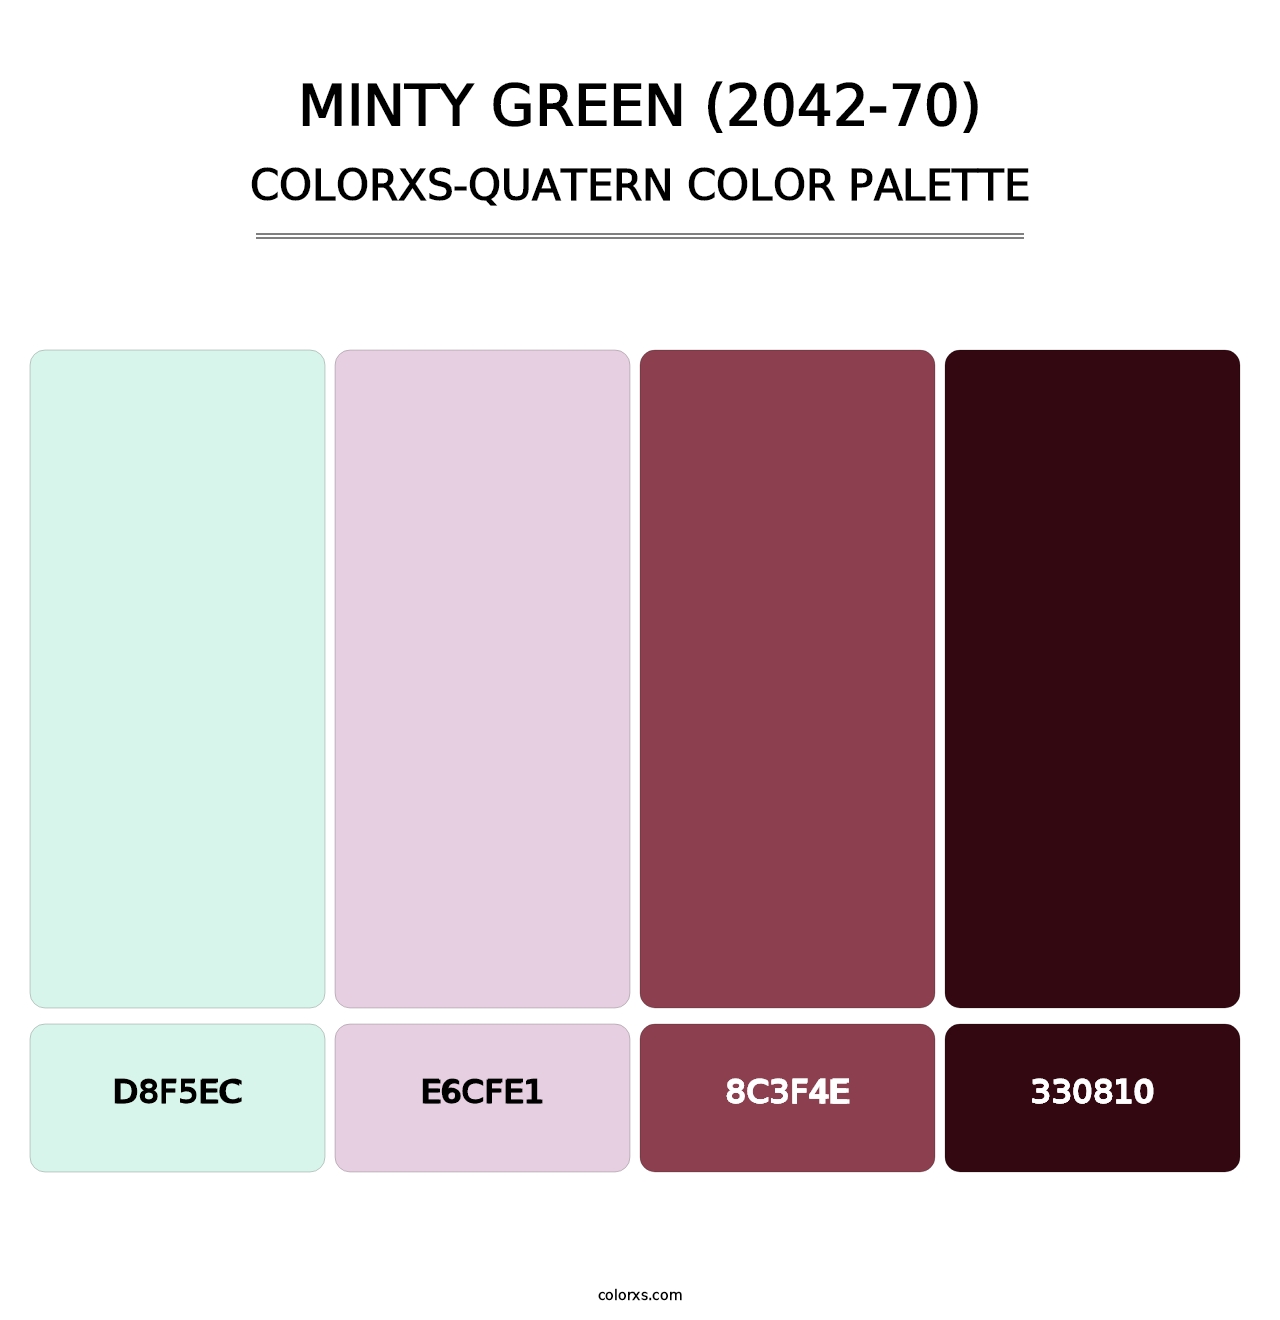 Minty Green (2042-70) - Colorxs Quatern Palette